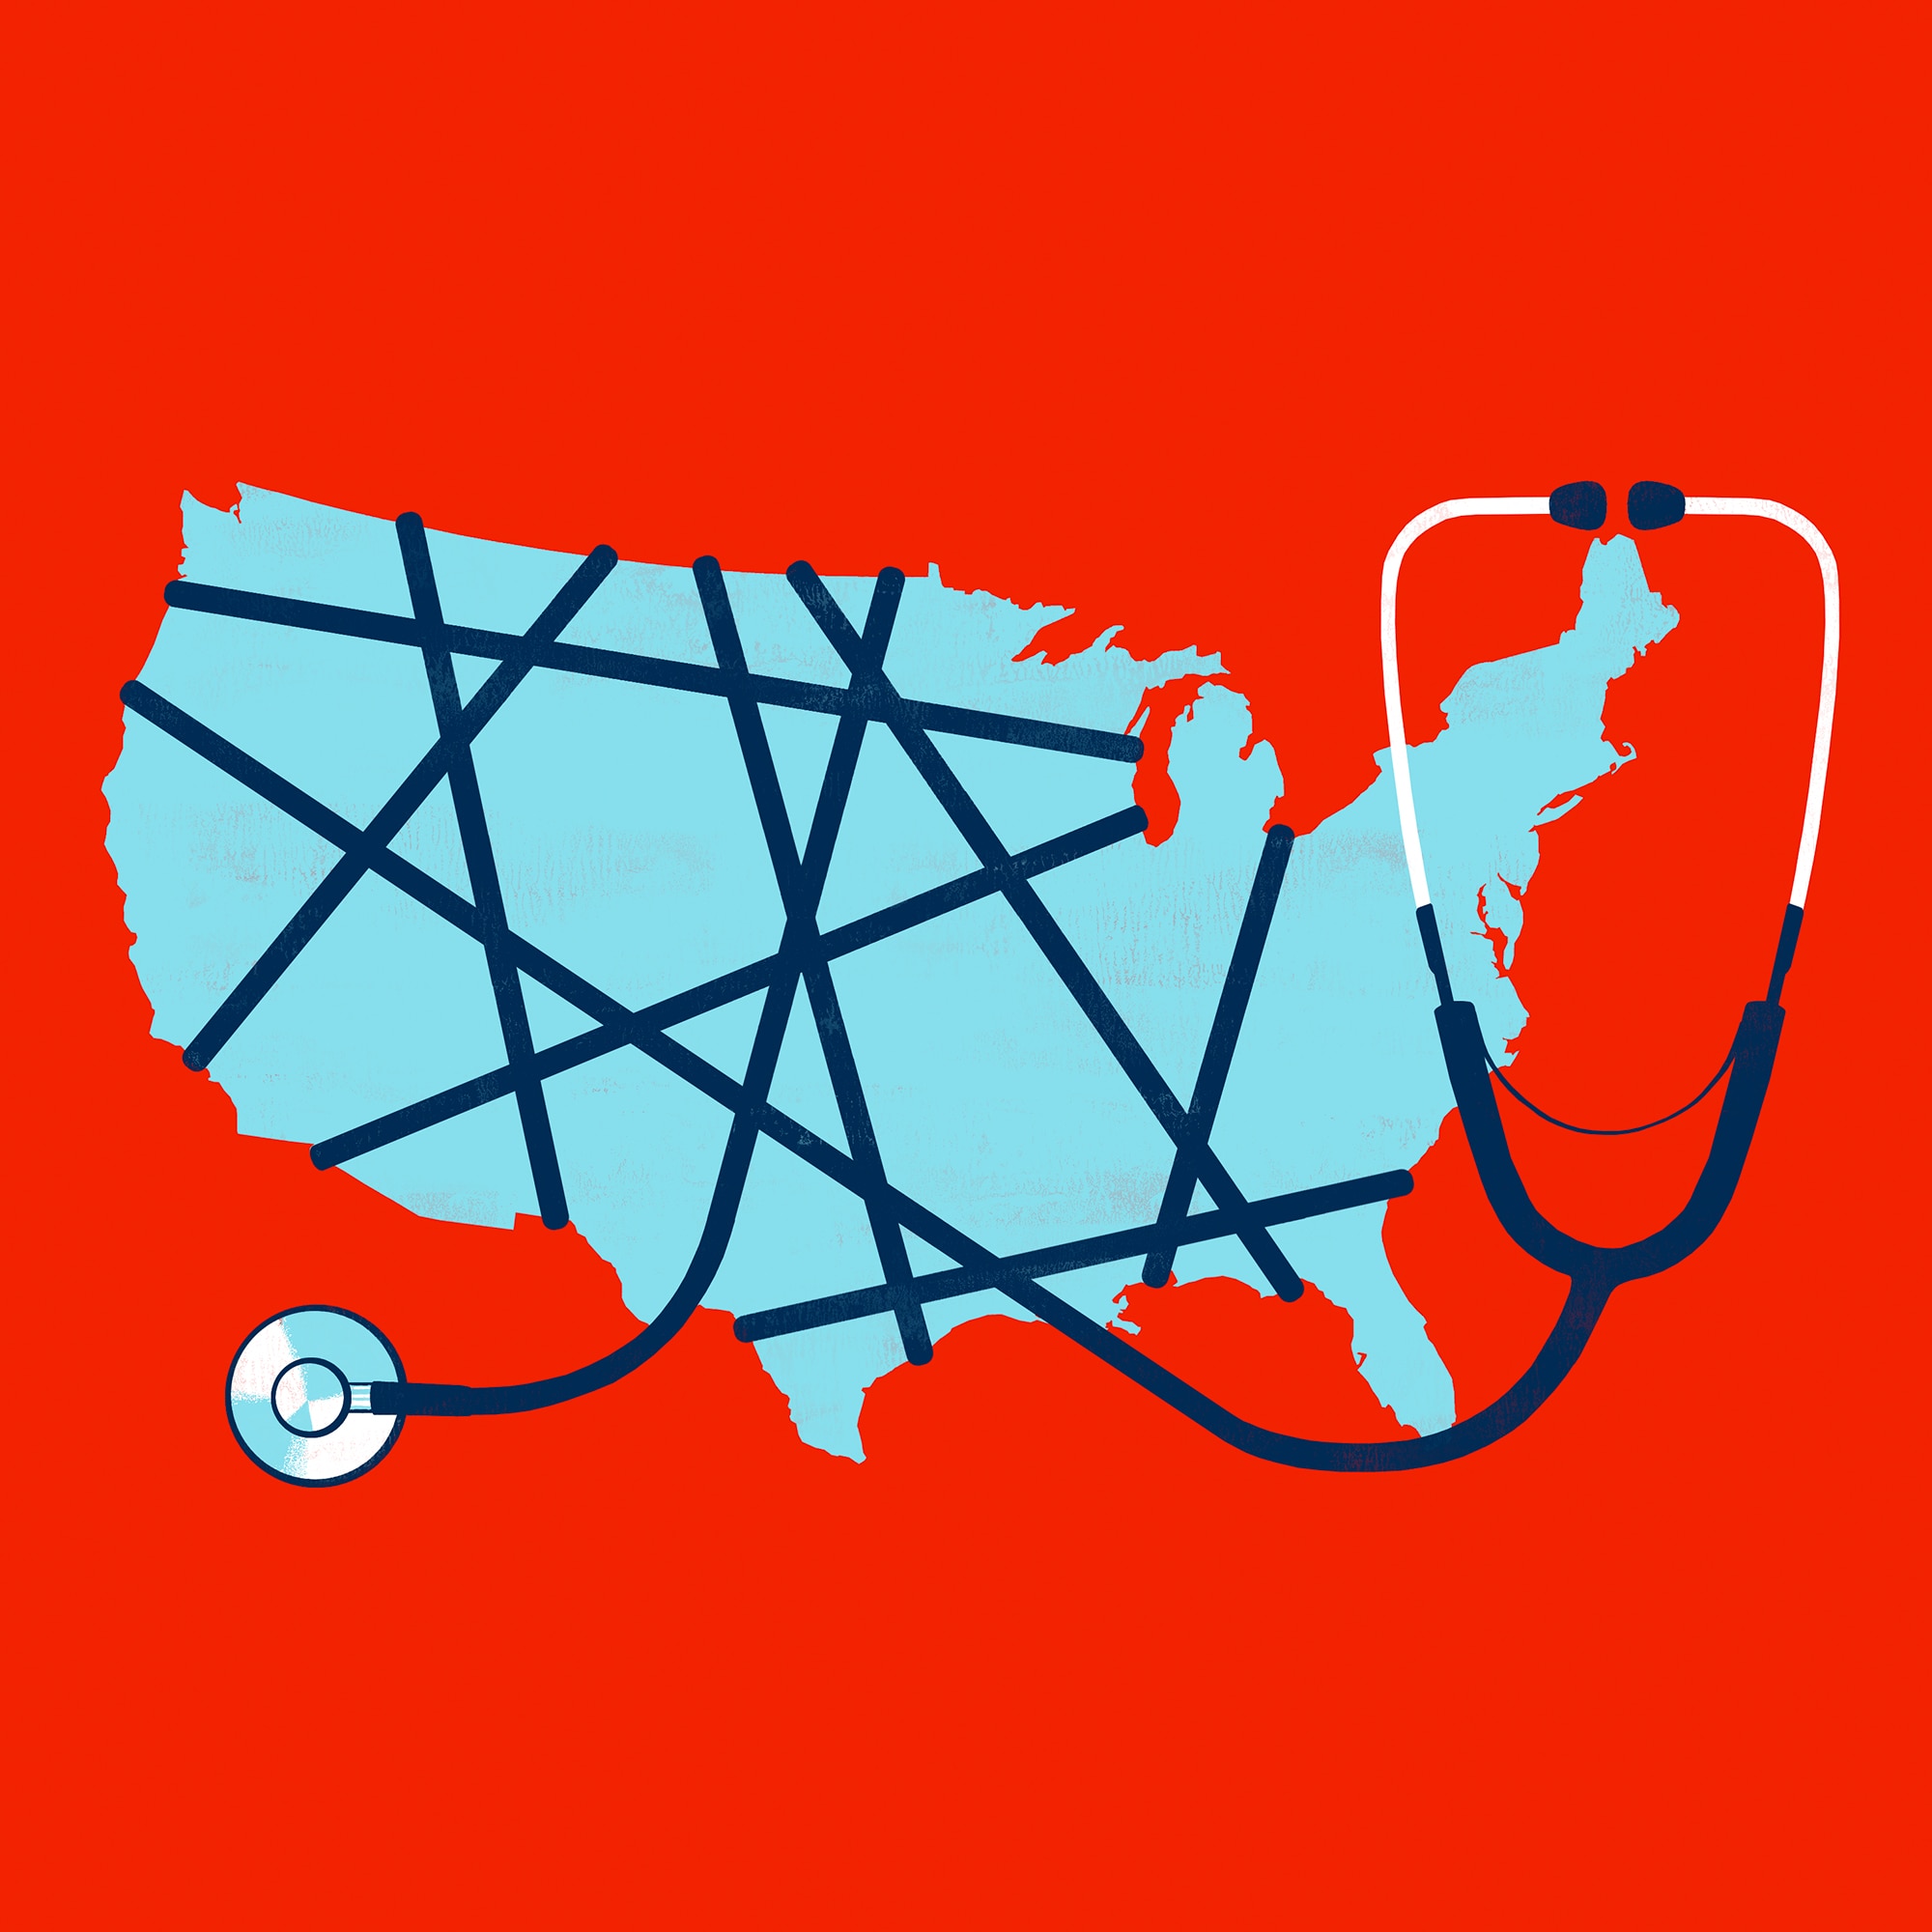 A map of the united states wrapped with a stethoscope cable.